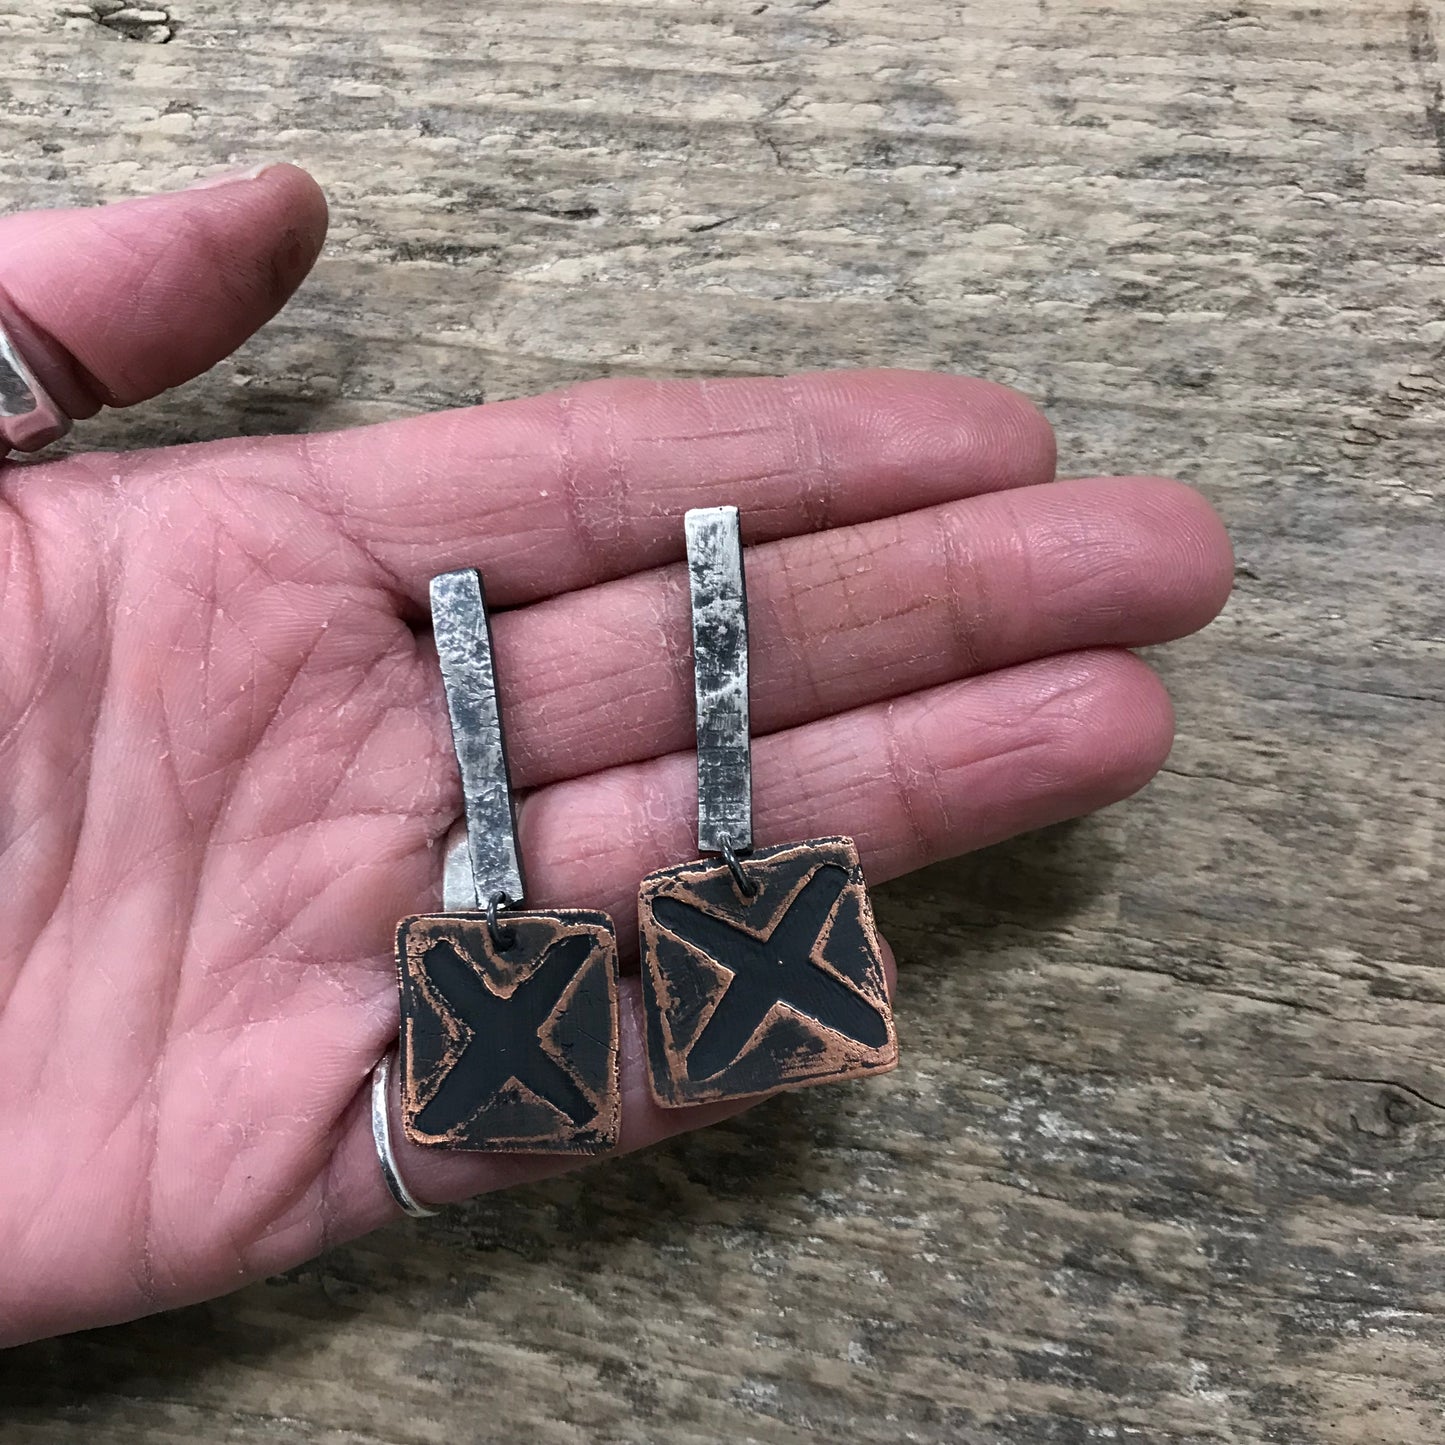 etched X earrings